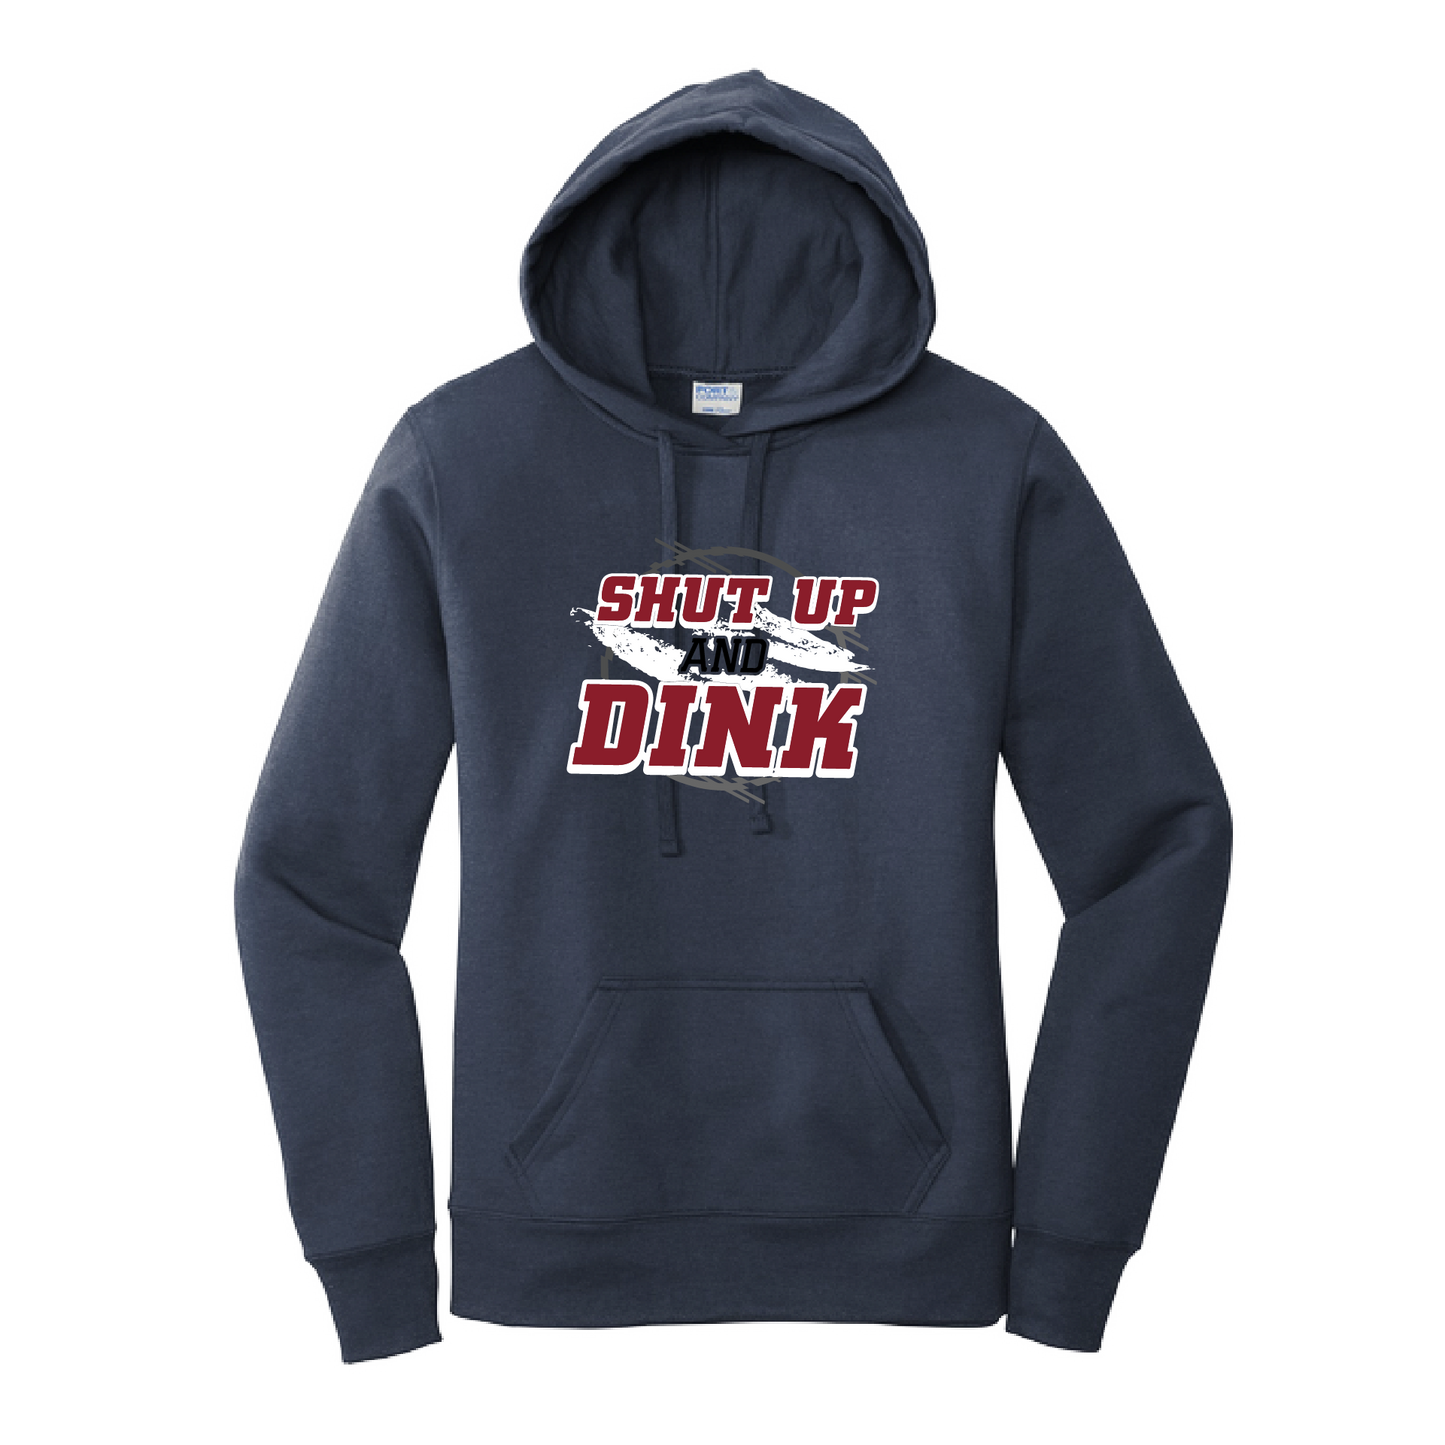 Pickleball Design: Shut Up and Dink  Women's Hooded pullover Sweatshirt  Turn up the volume in this Women's Sweatshirts with its perfect mix of softness and attitude. Ultra soft lined inside with a lined hood also. This is fitted nicely for a women's figure. Front pouch pocket.